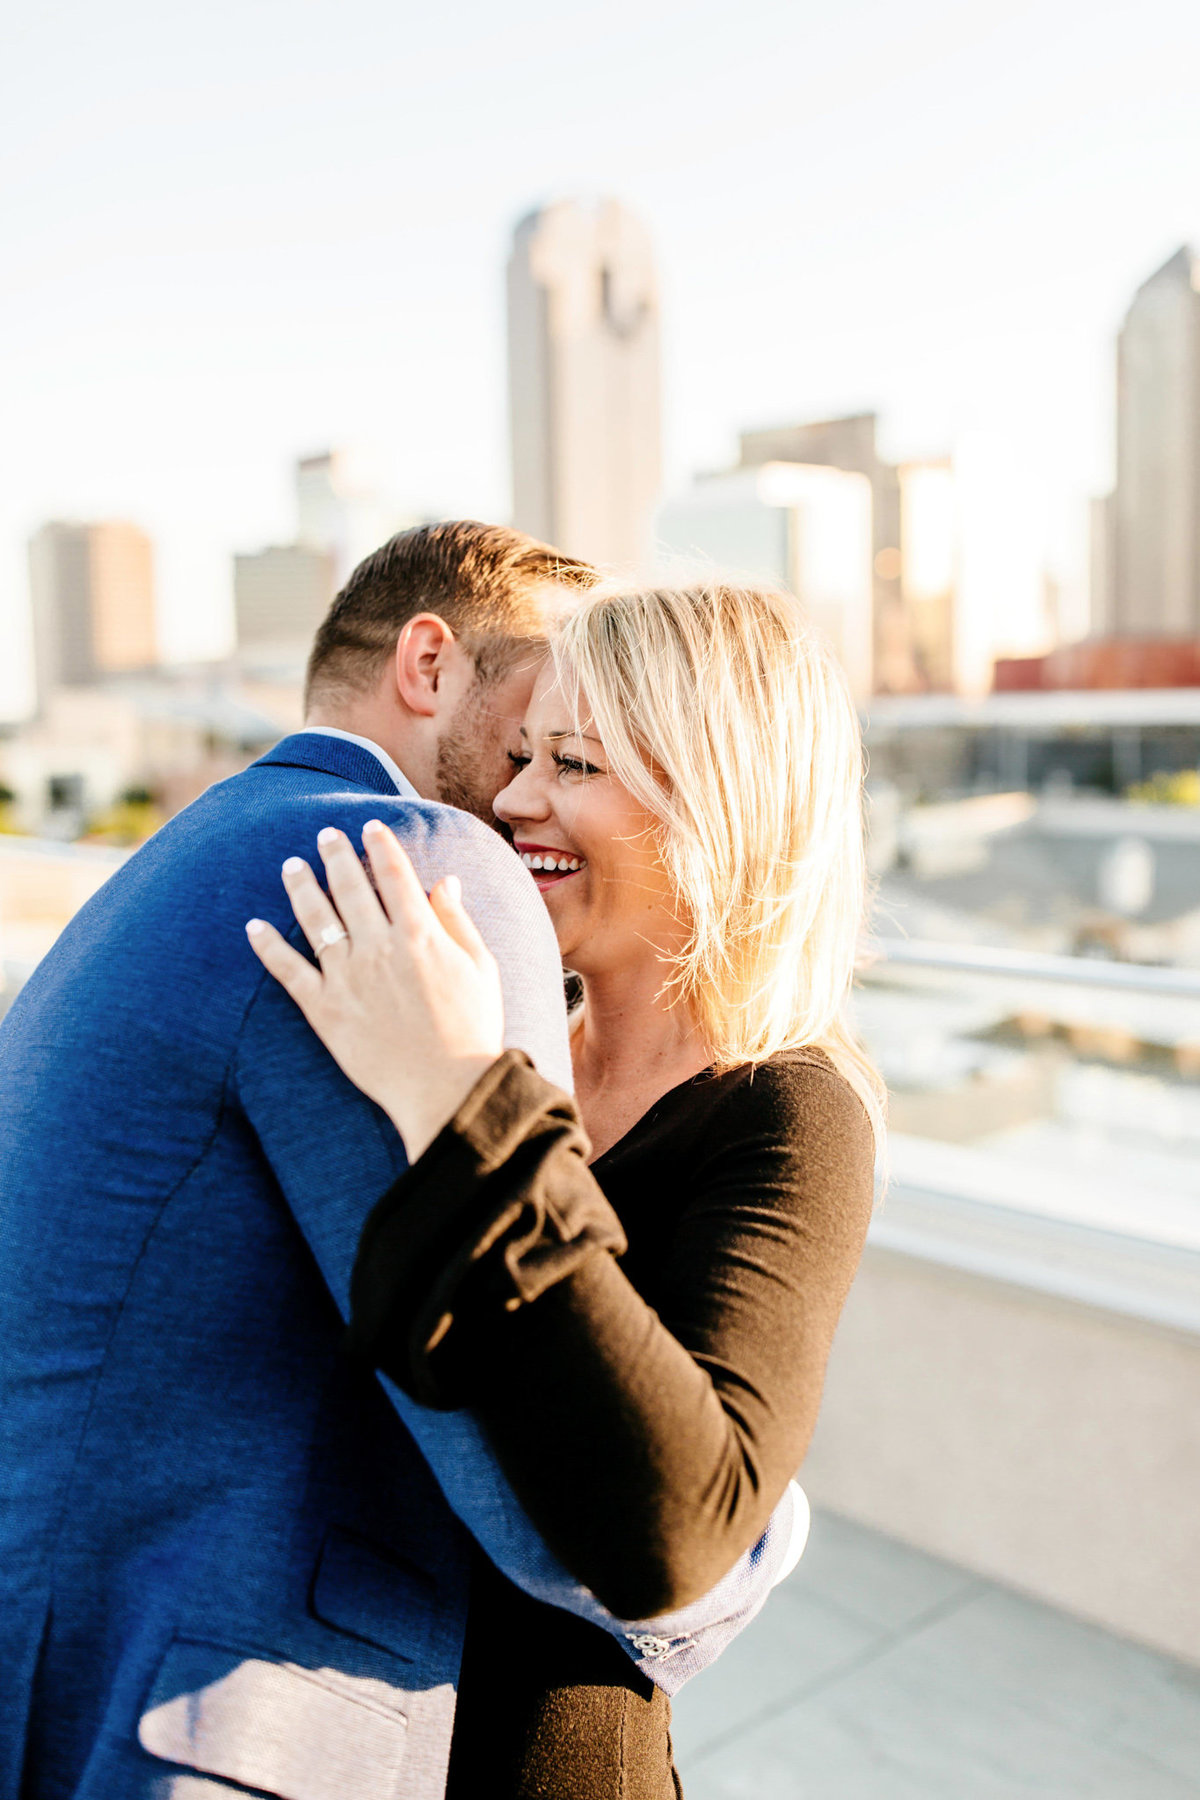 Eric & Megan - Downtown Dallas Rooftop Proposal & Engagement Session-73